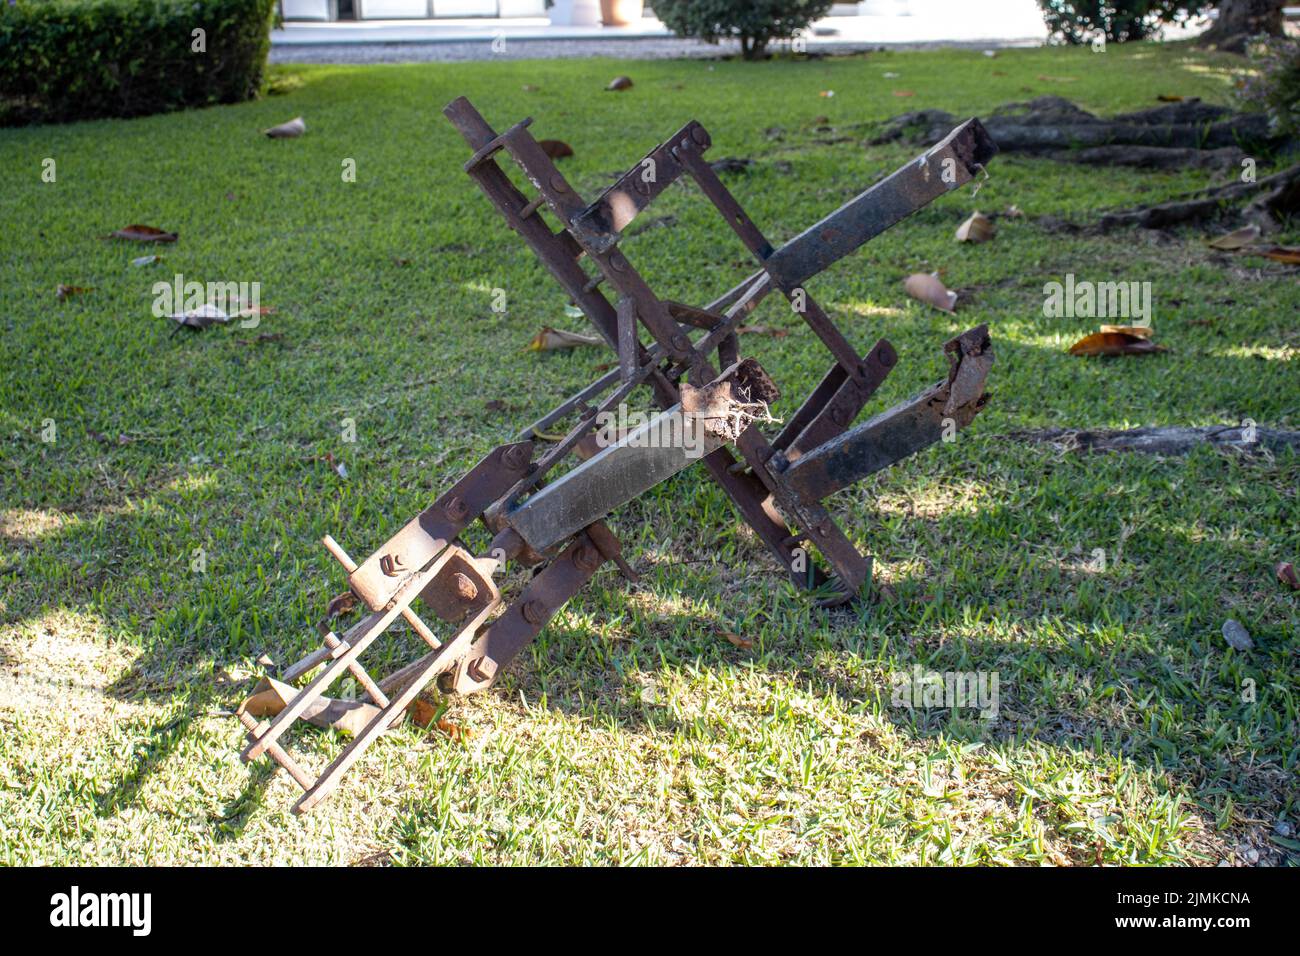 MARBELLA, ANDALUSIA, SPAIN - NOVEMBER 3, 2021 old farm plough on a grass lawn Stock Photo